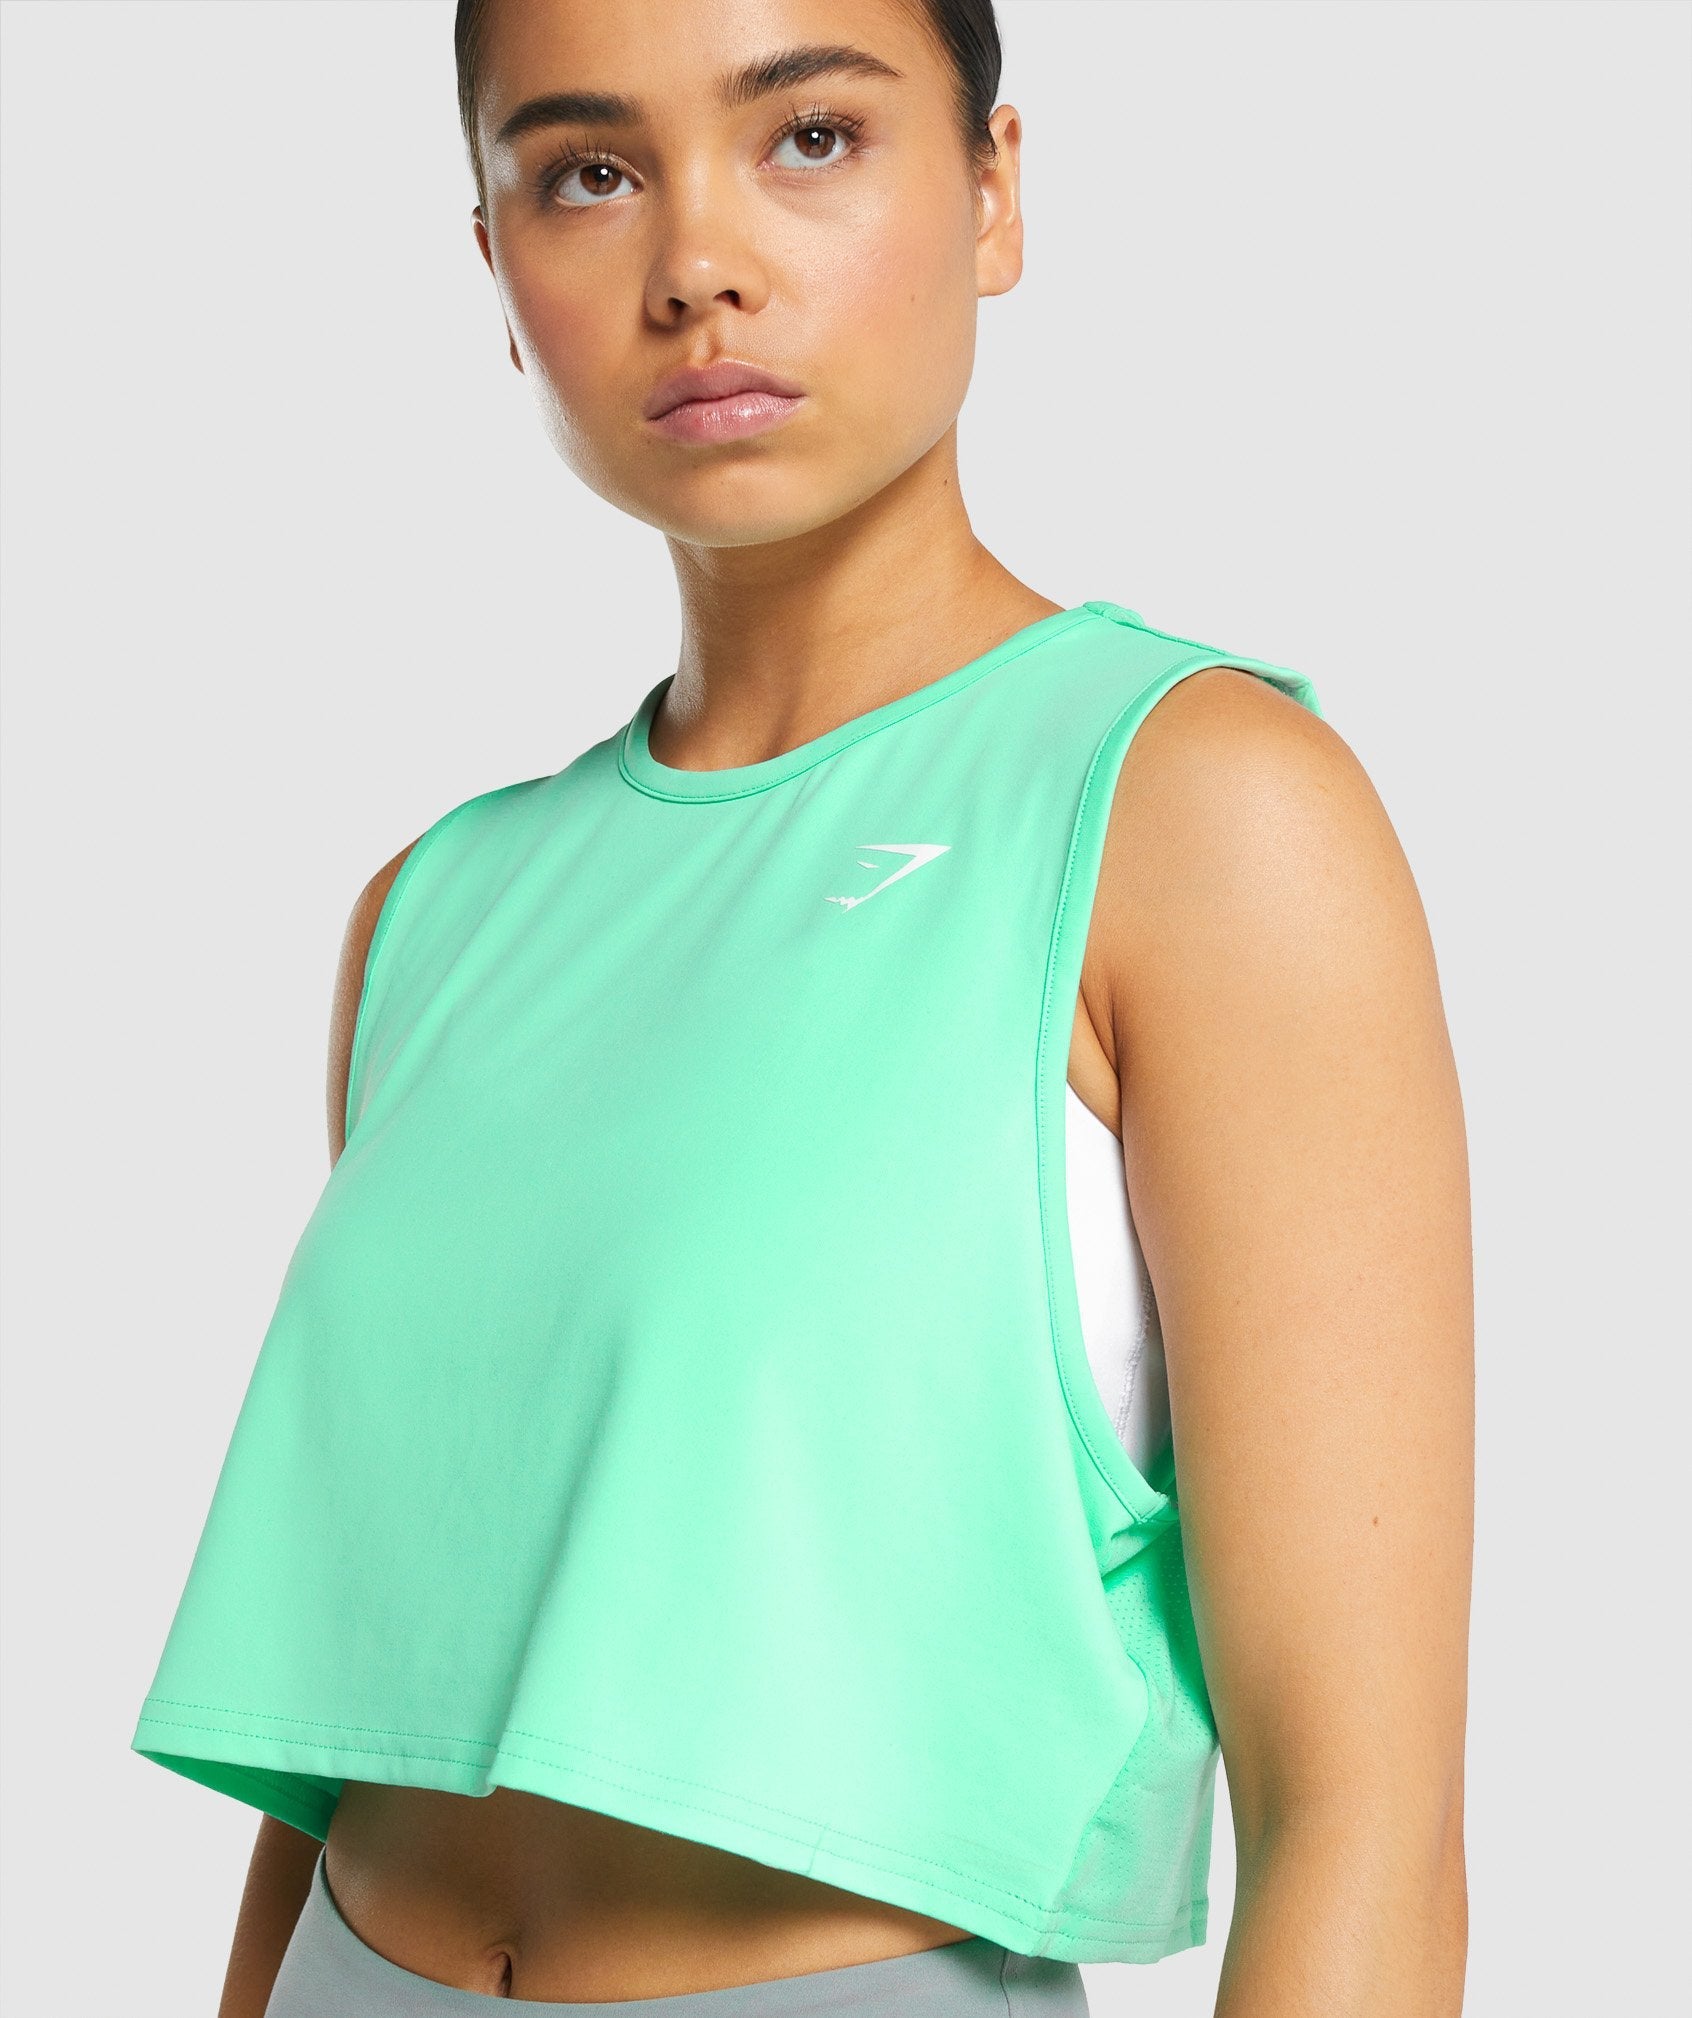 Training Crop Tank in Turquoise - view 6